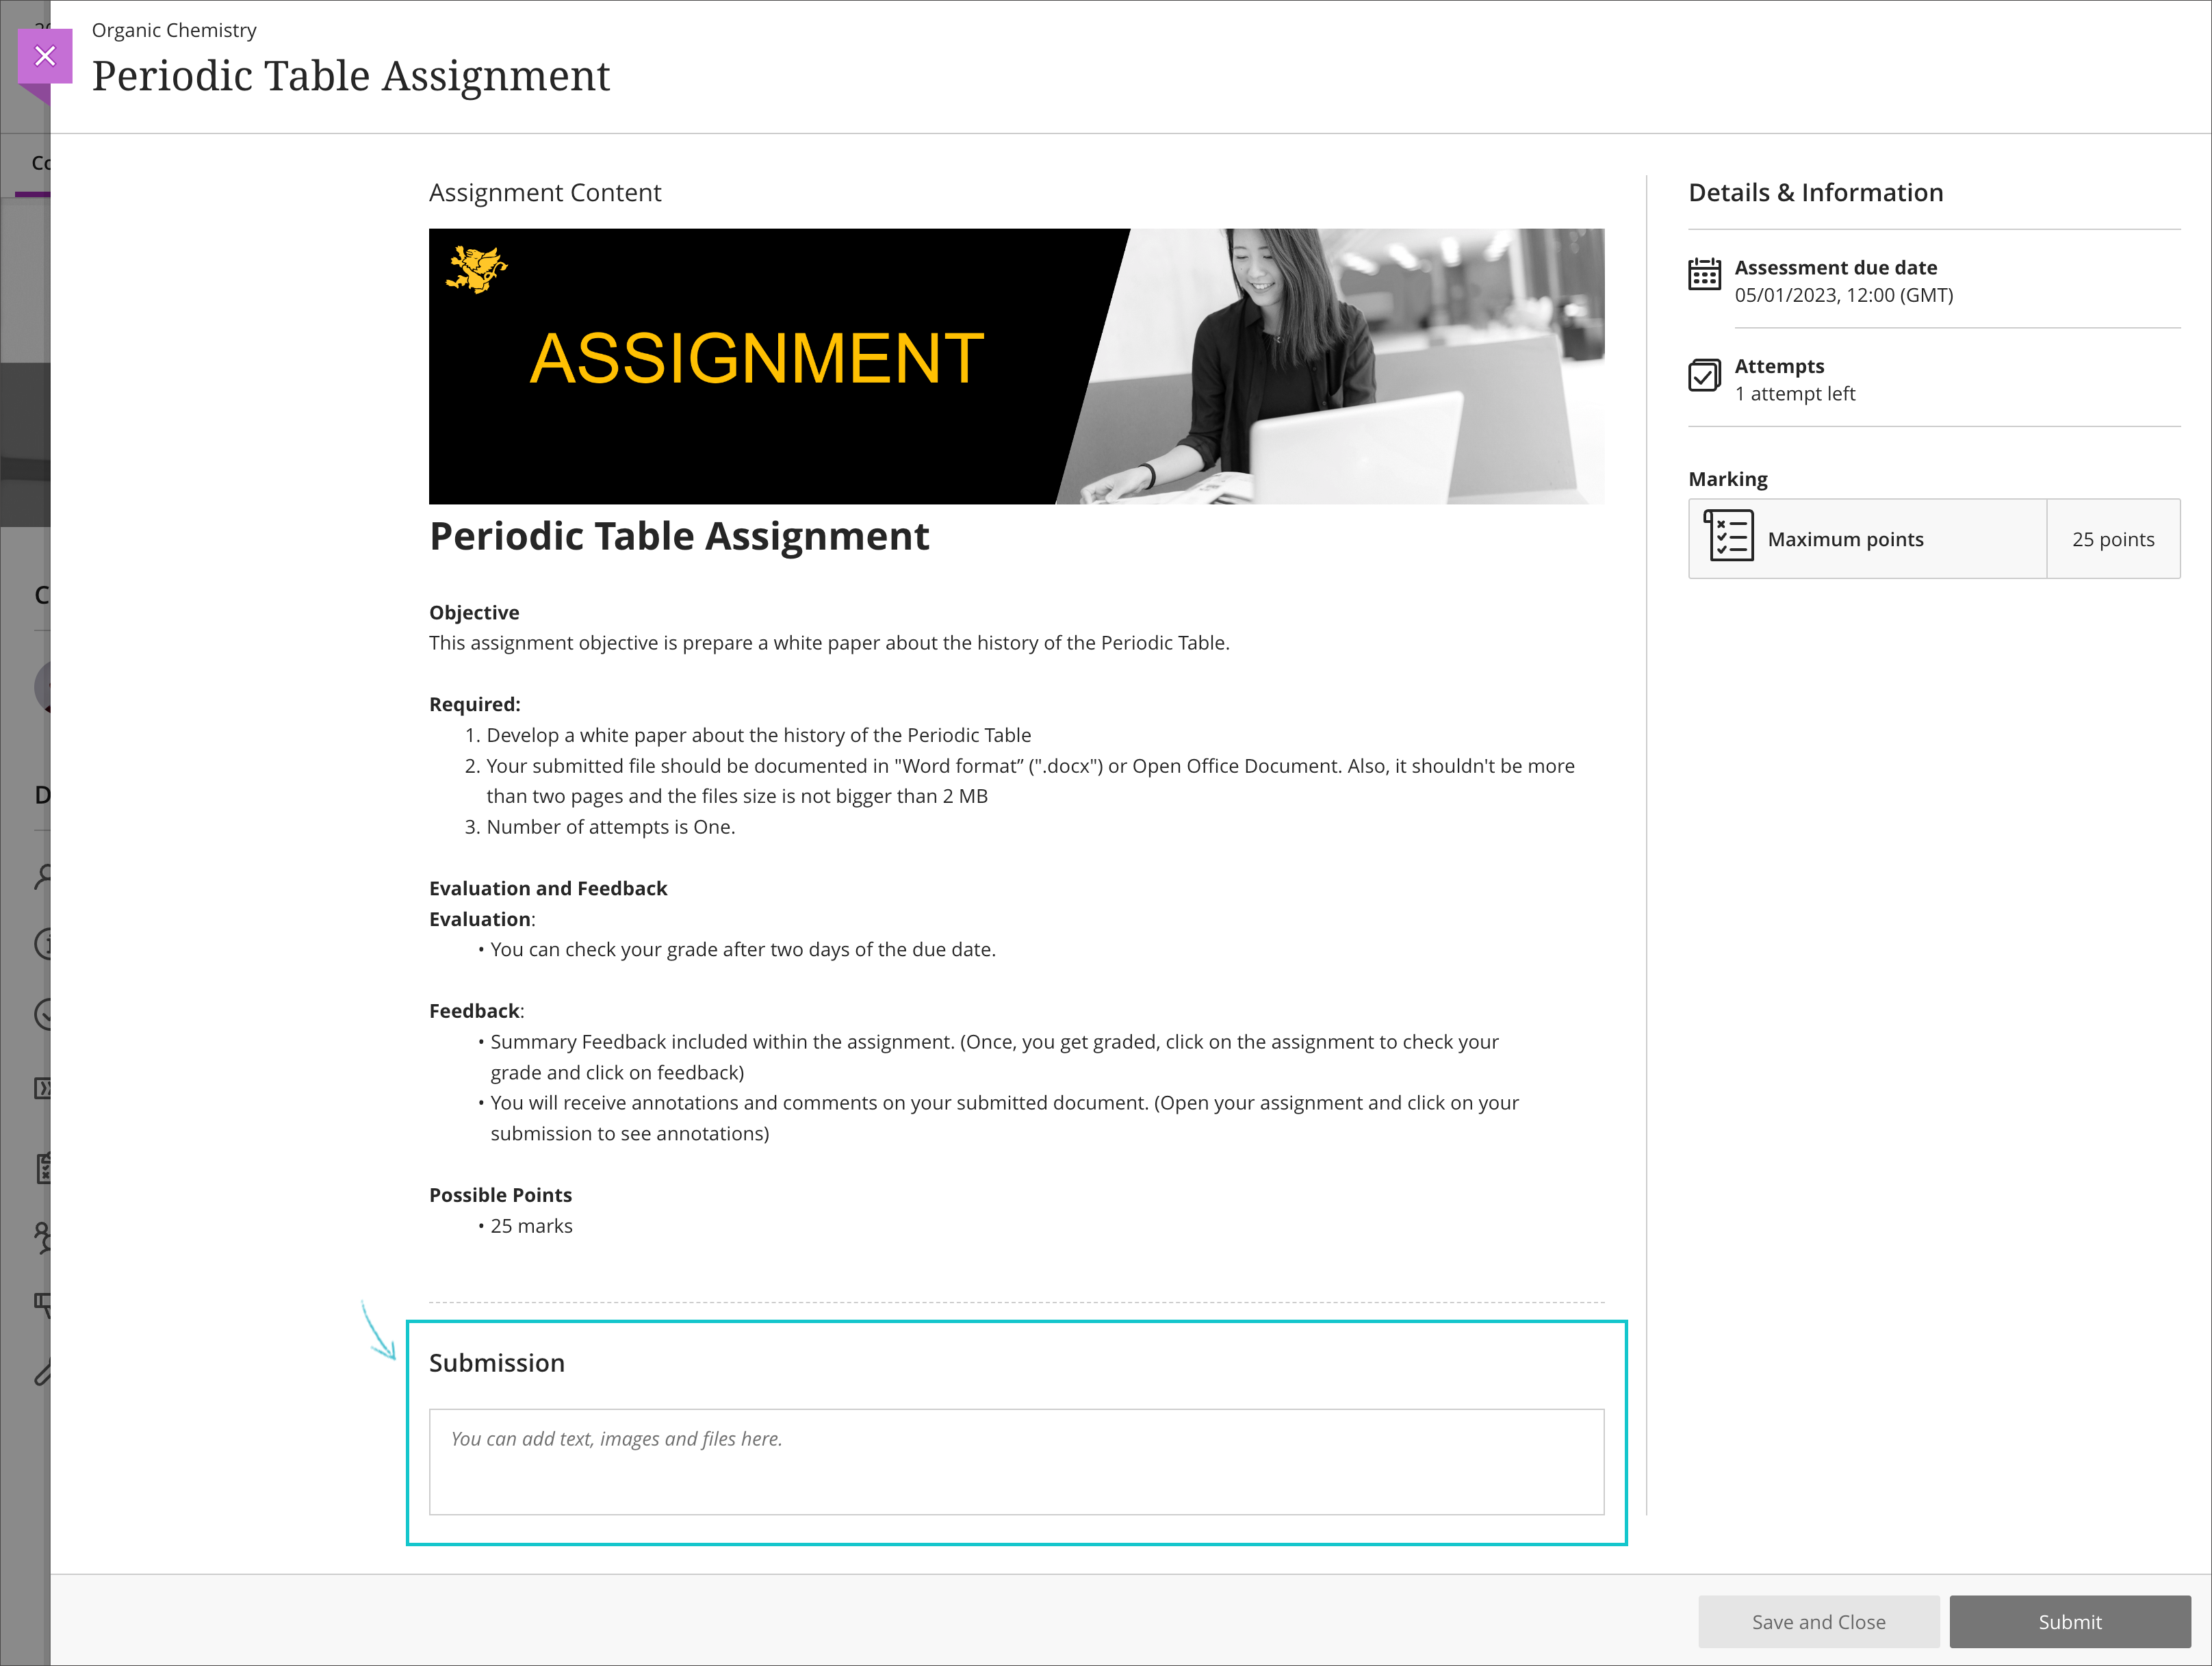 Submit an assignment interface in Ultra